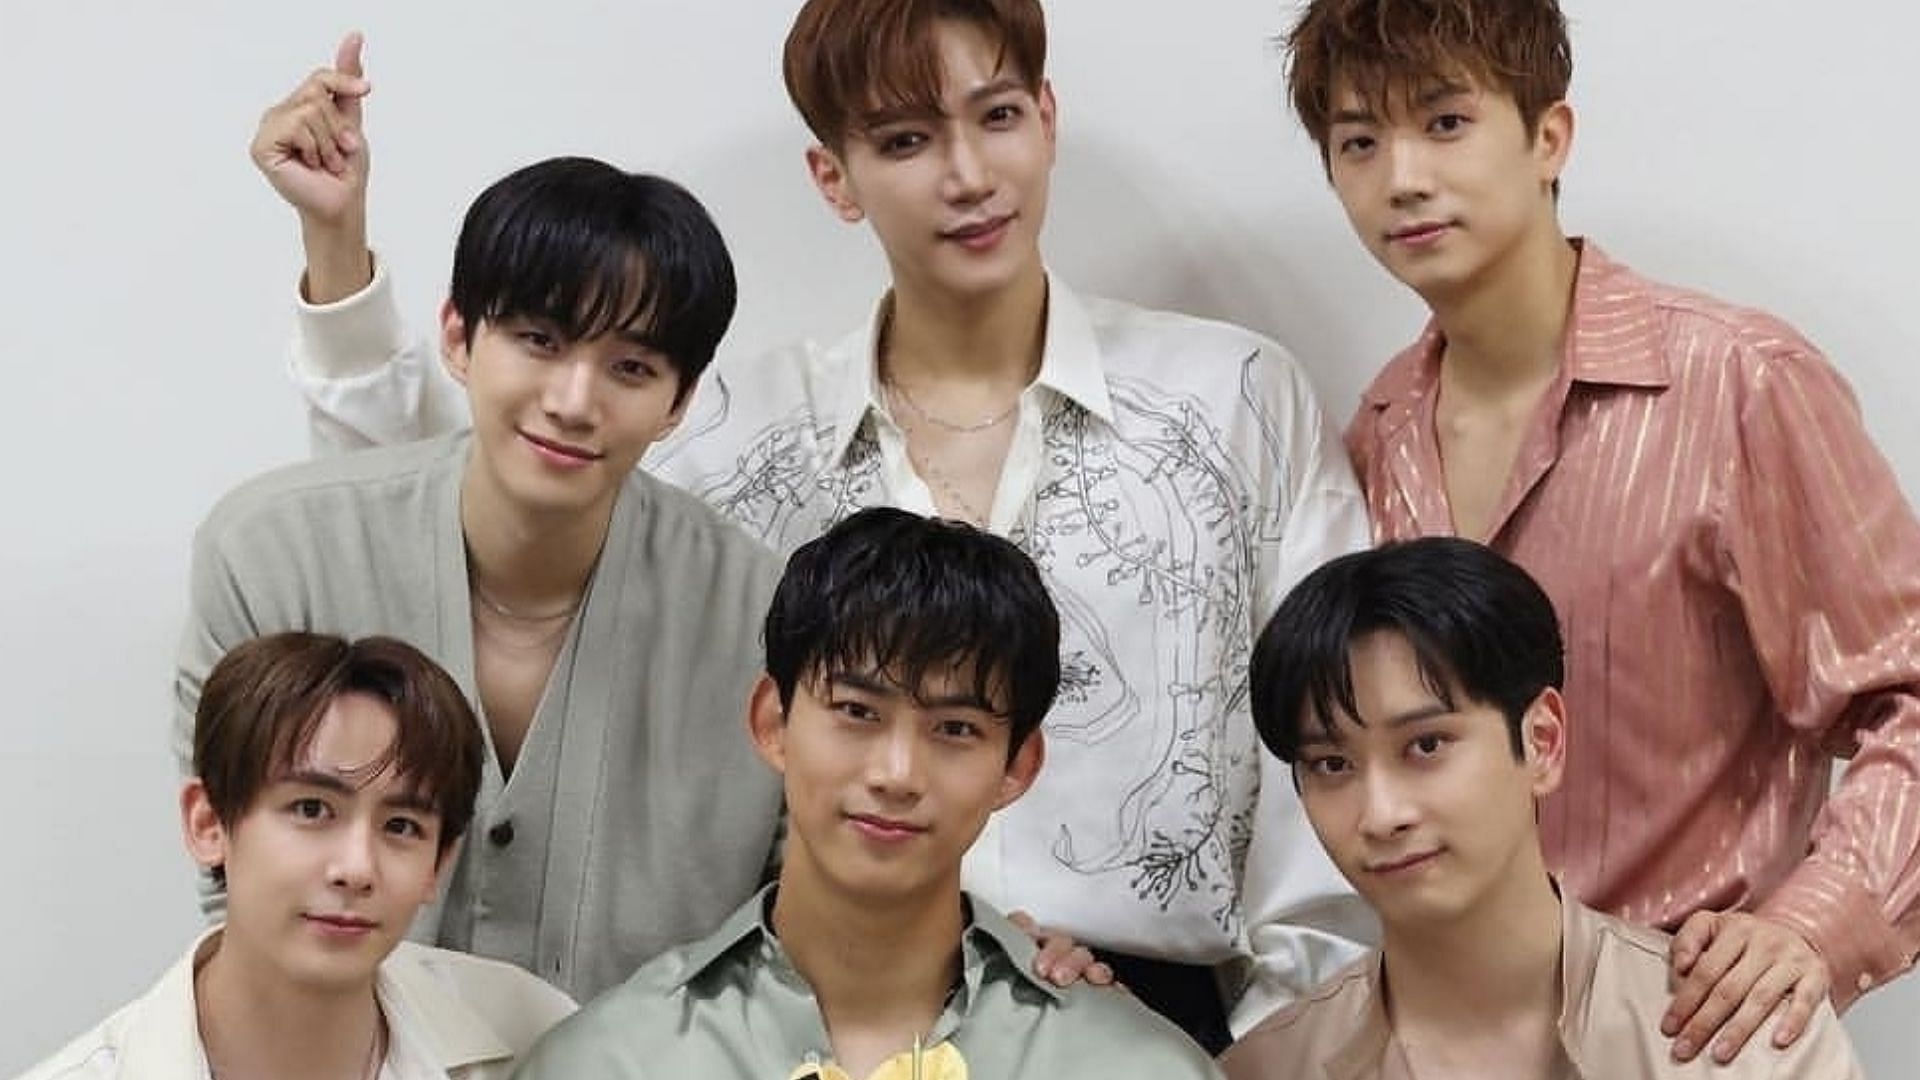 2PM's Taecyeon shows support for Chansung after fellow band member